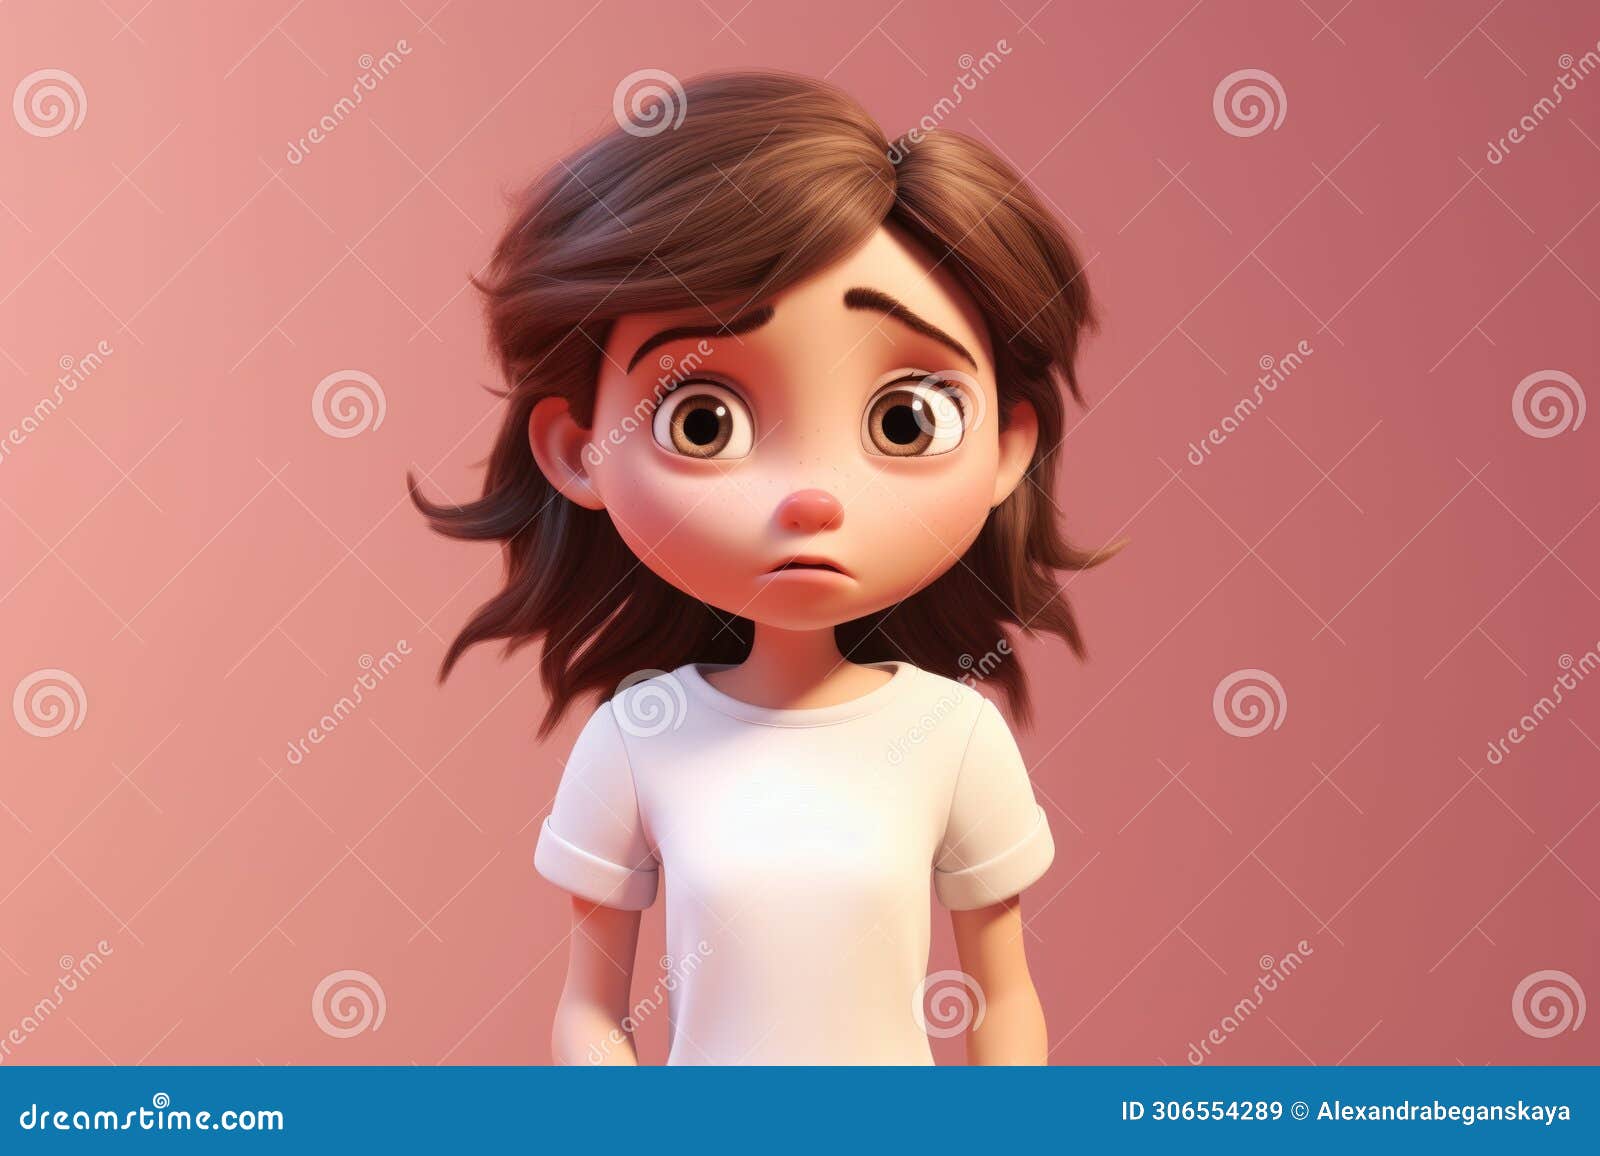 worried girl with downcast eyes